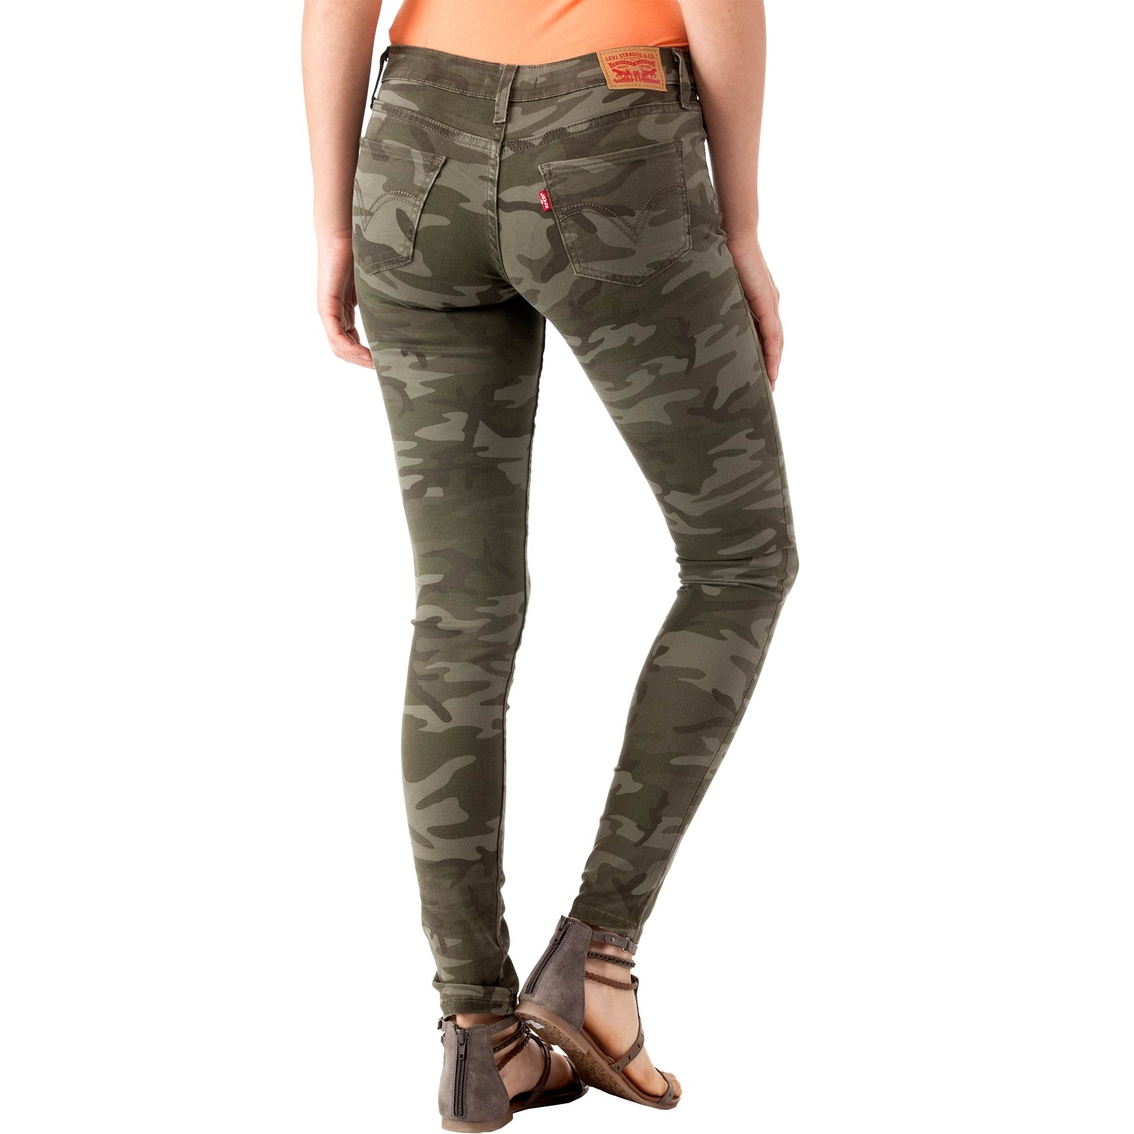 Levi's 535 Super Skinny Jeans, Camouflage | Jeans | Clothing & Accessories  | Shop The Exchange